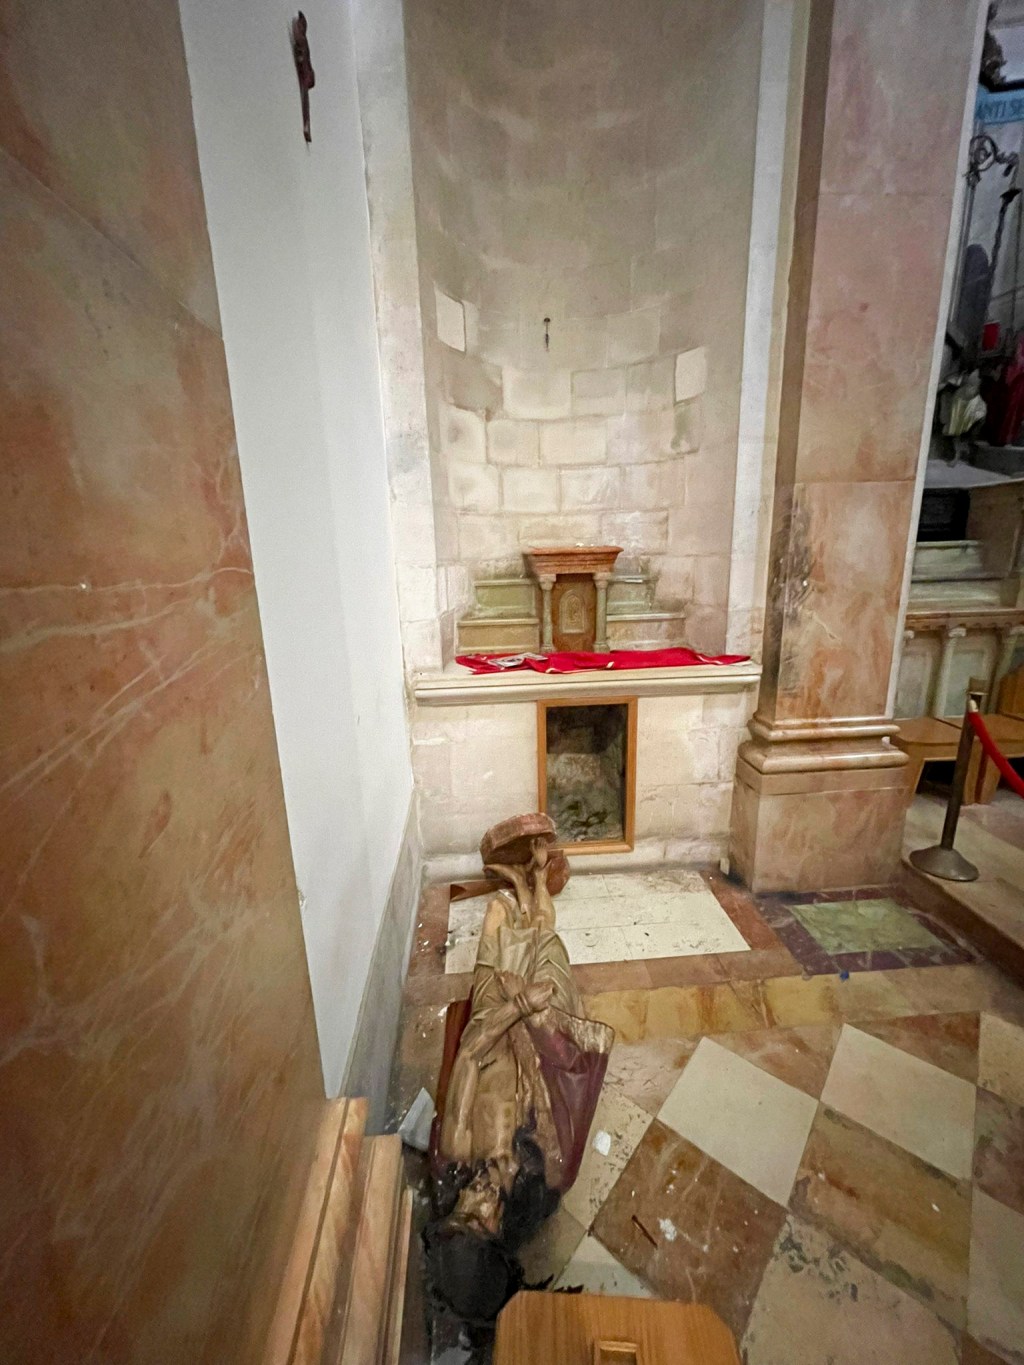 Attack-occured-at-the-Chapel-of-the-Condemnation-Flagellation-Sanctuary-in-the-Old-City-of-Jerusalem